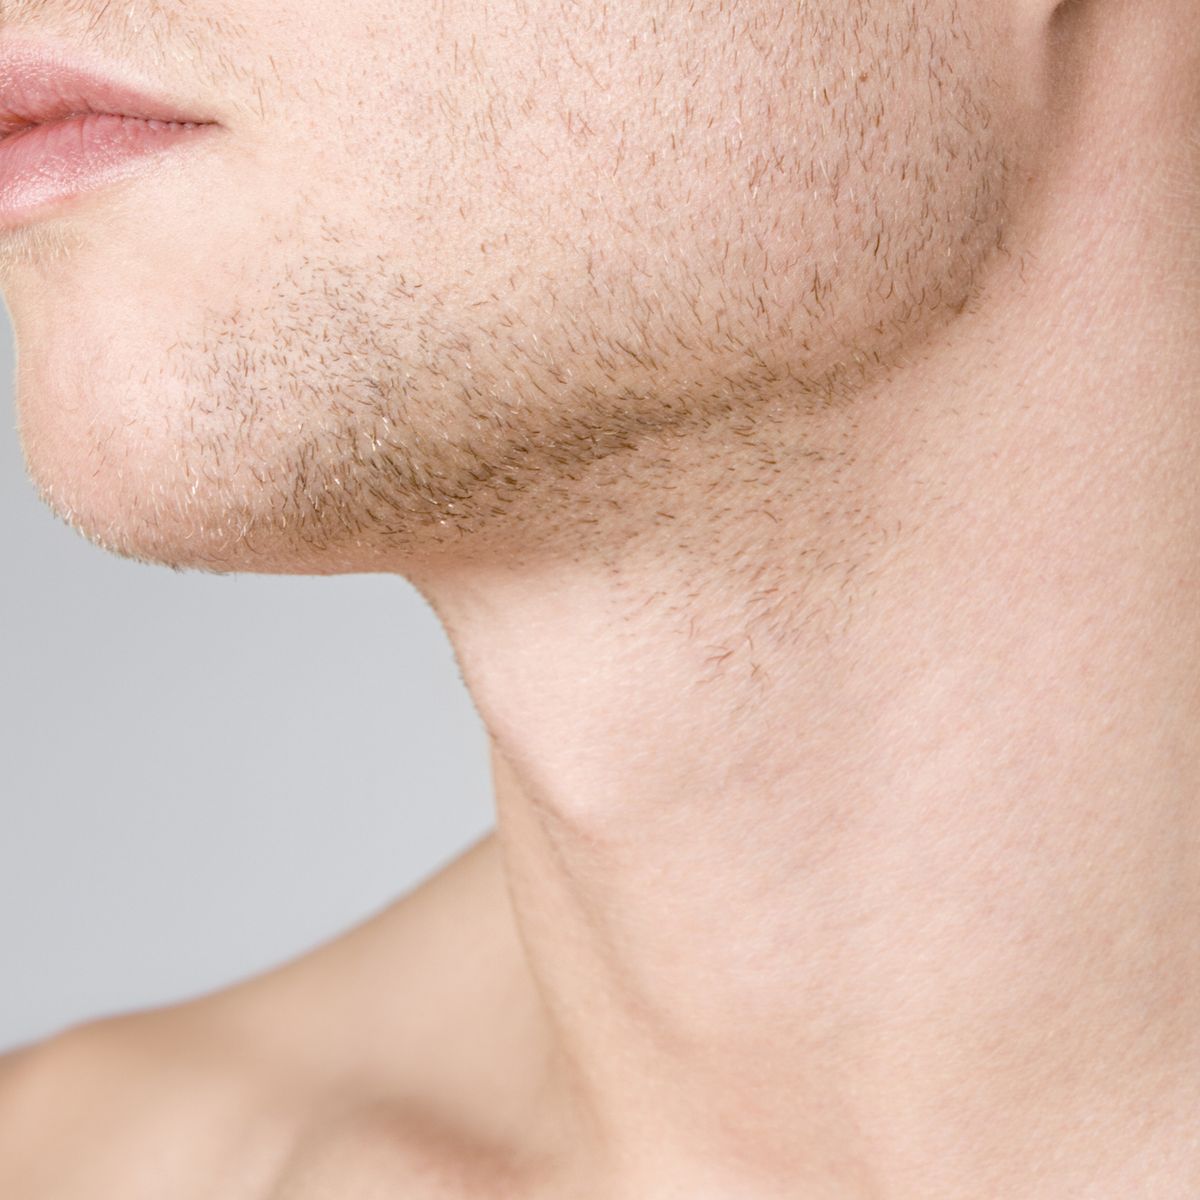 A Doctor Explains Whether 'Jaw Trainers' for Men Actually Work